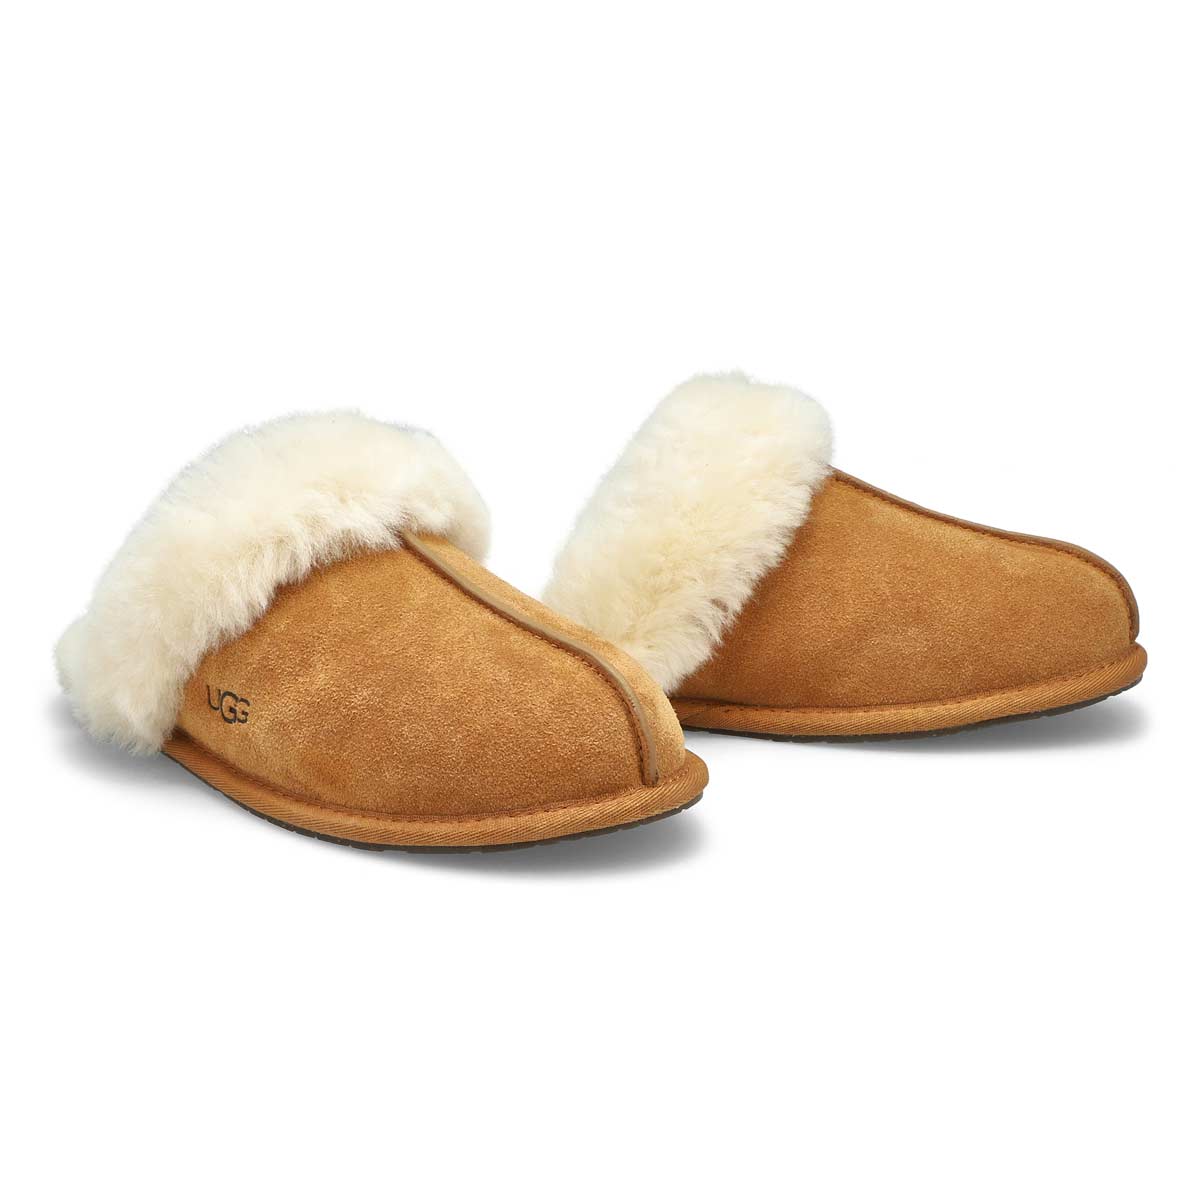 Ugg | Scuffette II Slippers | Mules Slippers | House of Fraser